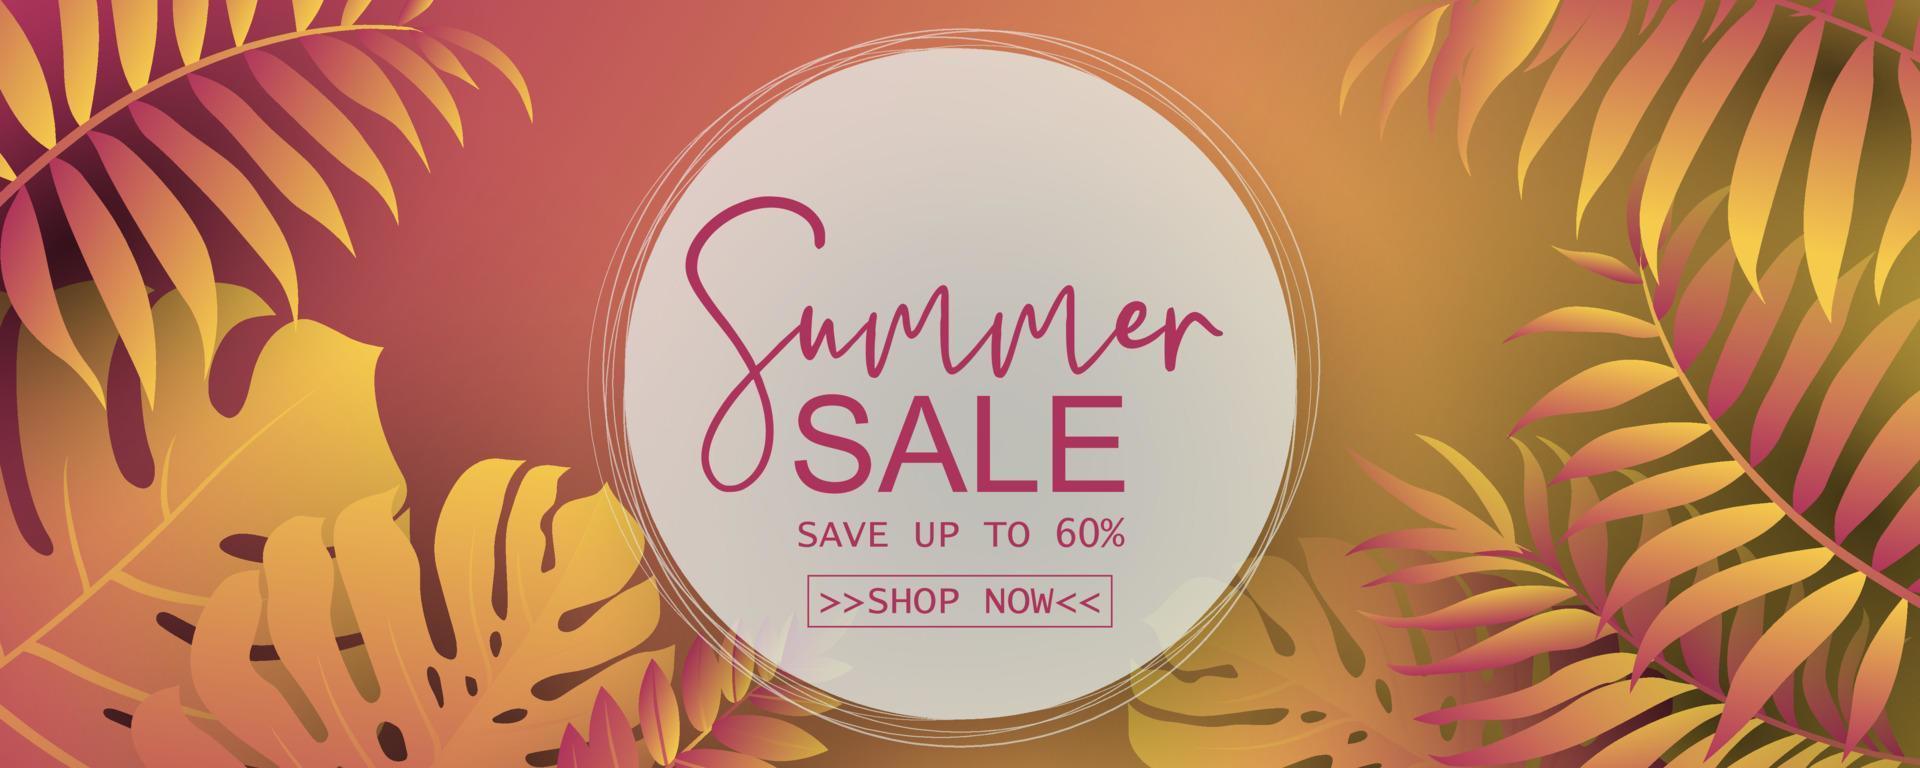 Elegant summer sale banner design with tropical theme vector